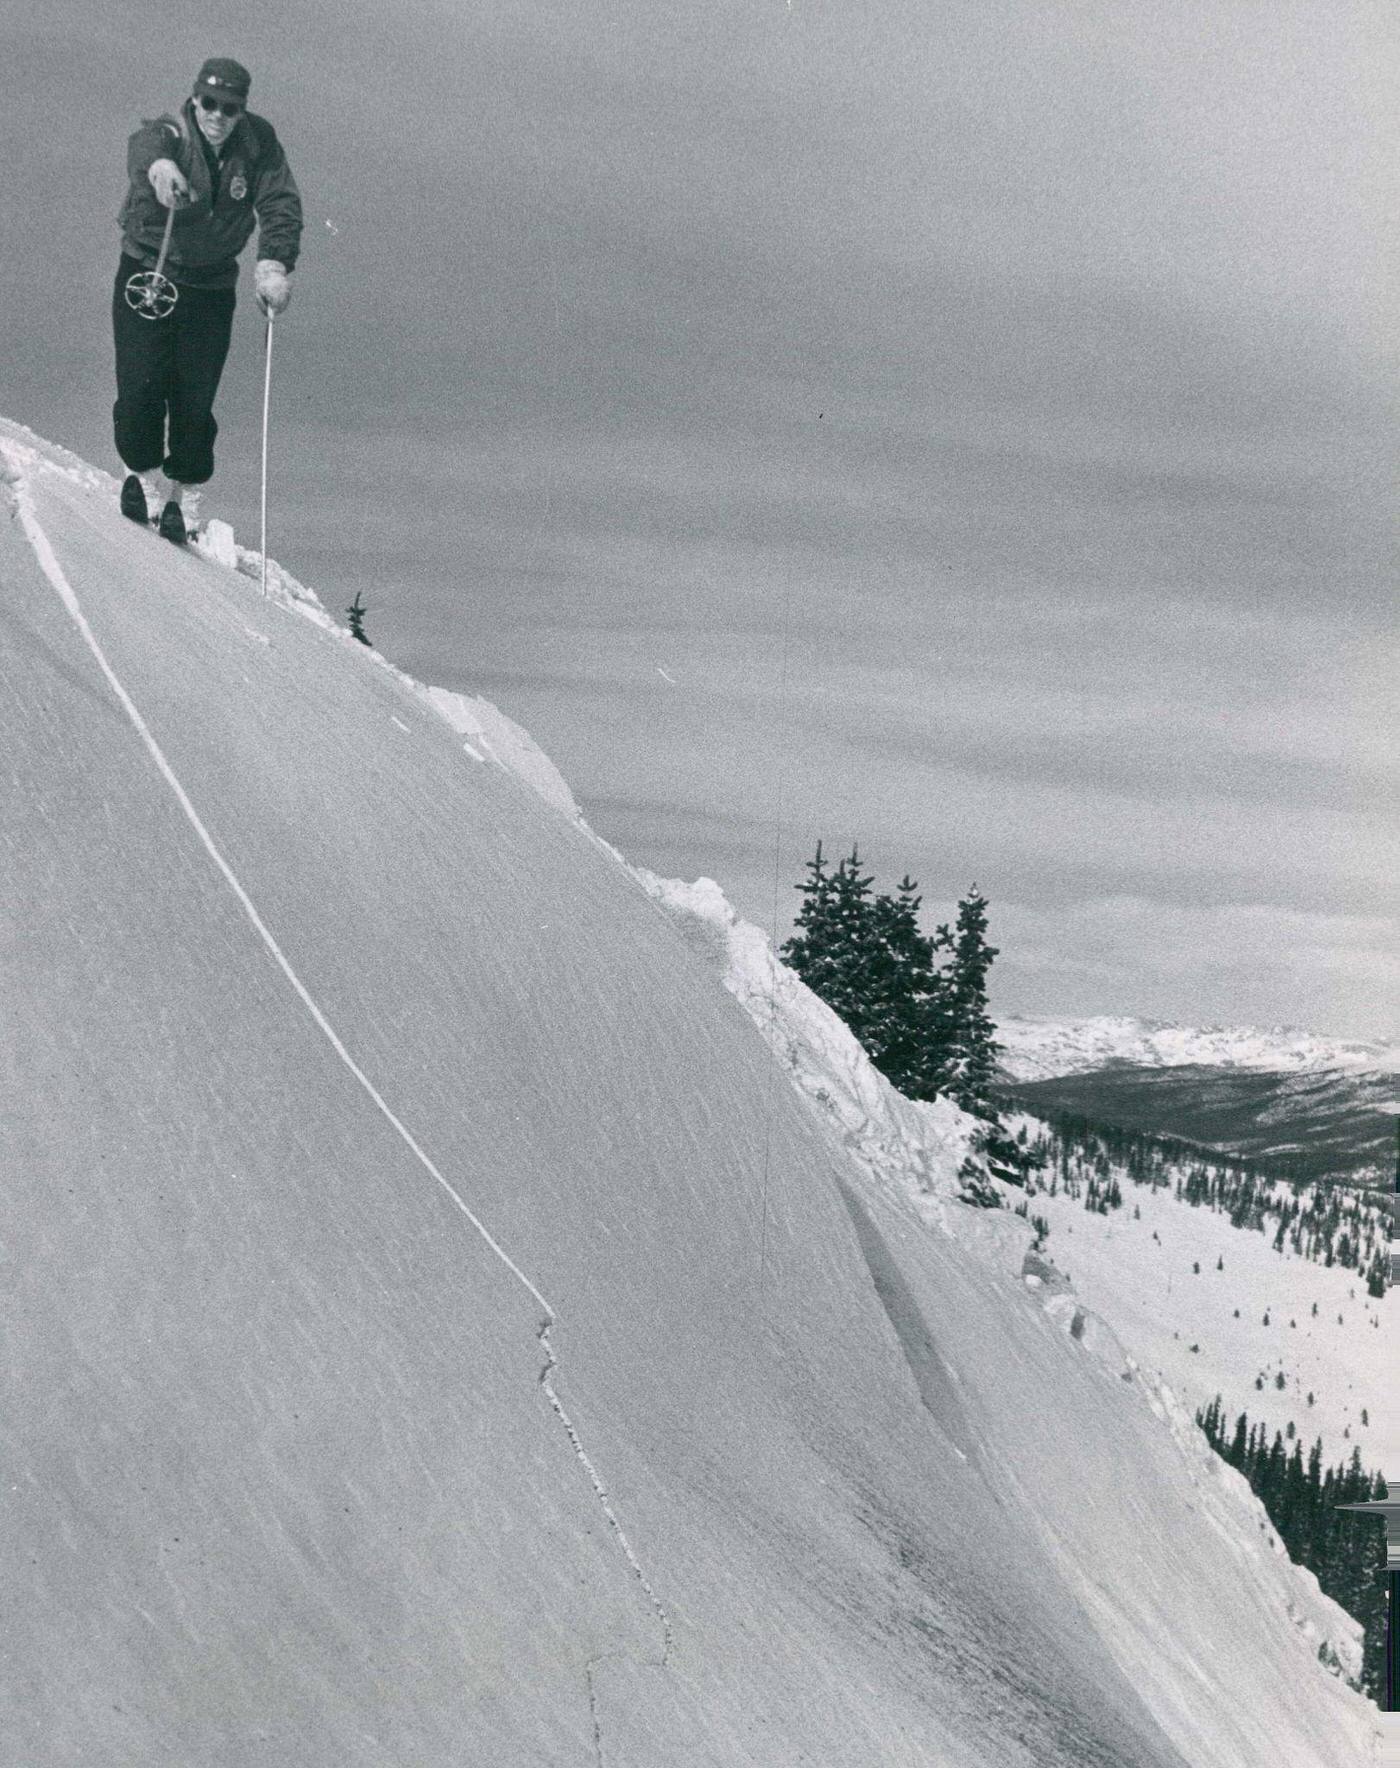 Dick Stillman, "avalanche buster" for the U.S. forest service atop Berthoud Pass, points out jagged fracture line in the snow.